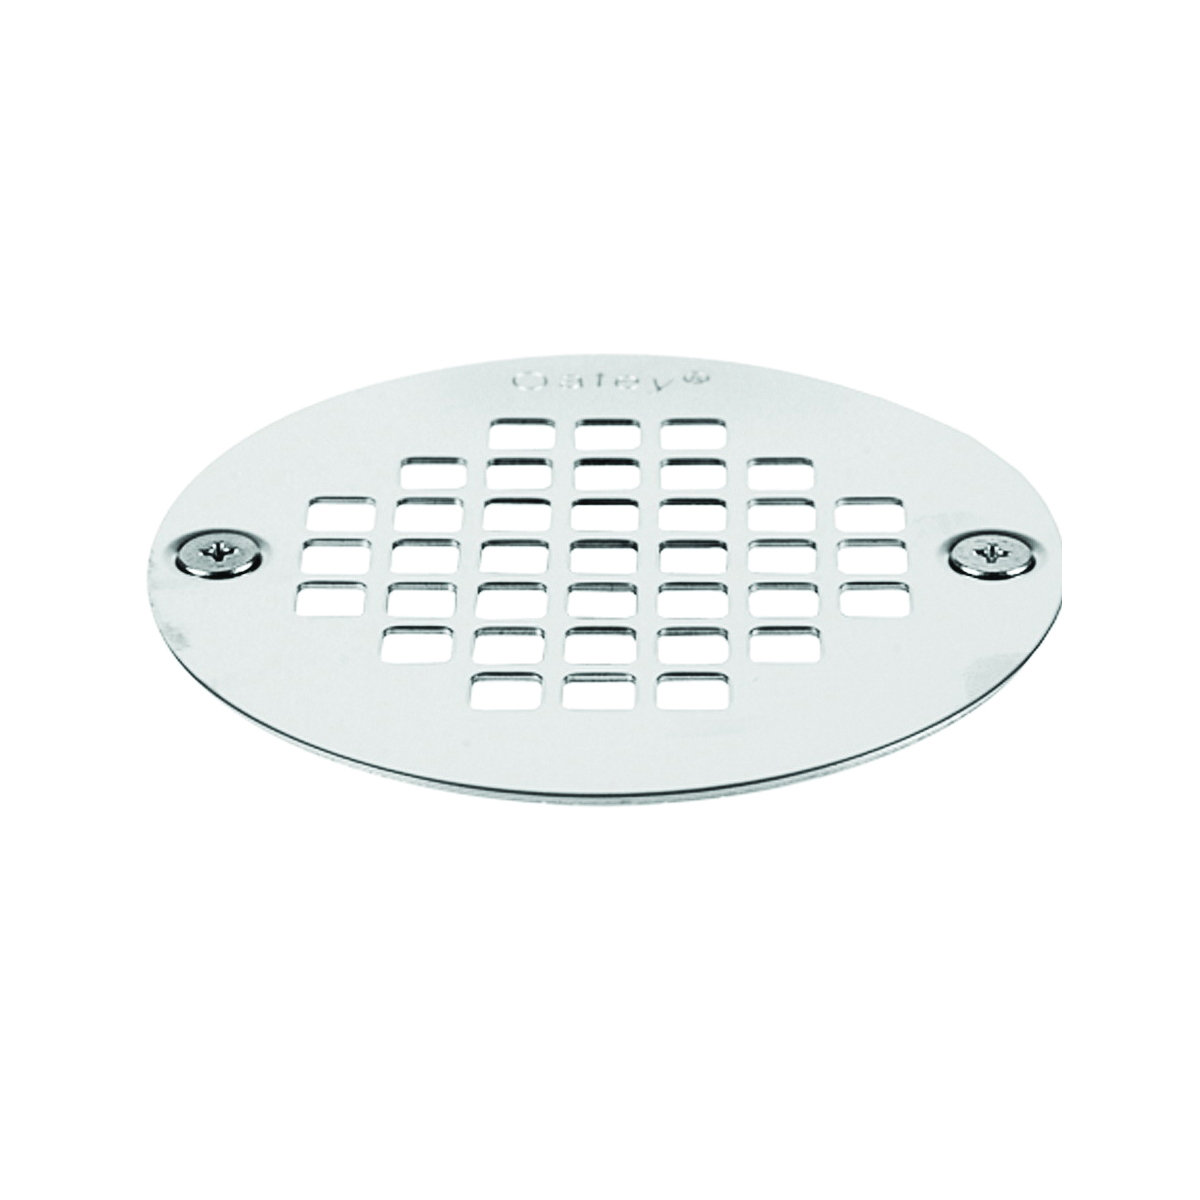 42358 Screw-Tite Strainer, Stainless Steel, For: 4 in Snap in Drains and 2 in or 3 in General-Purpose Drains